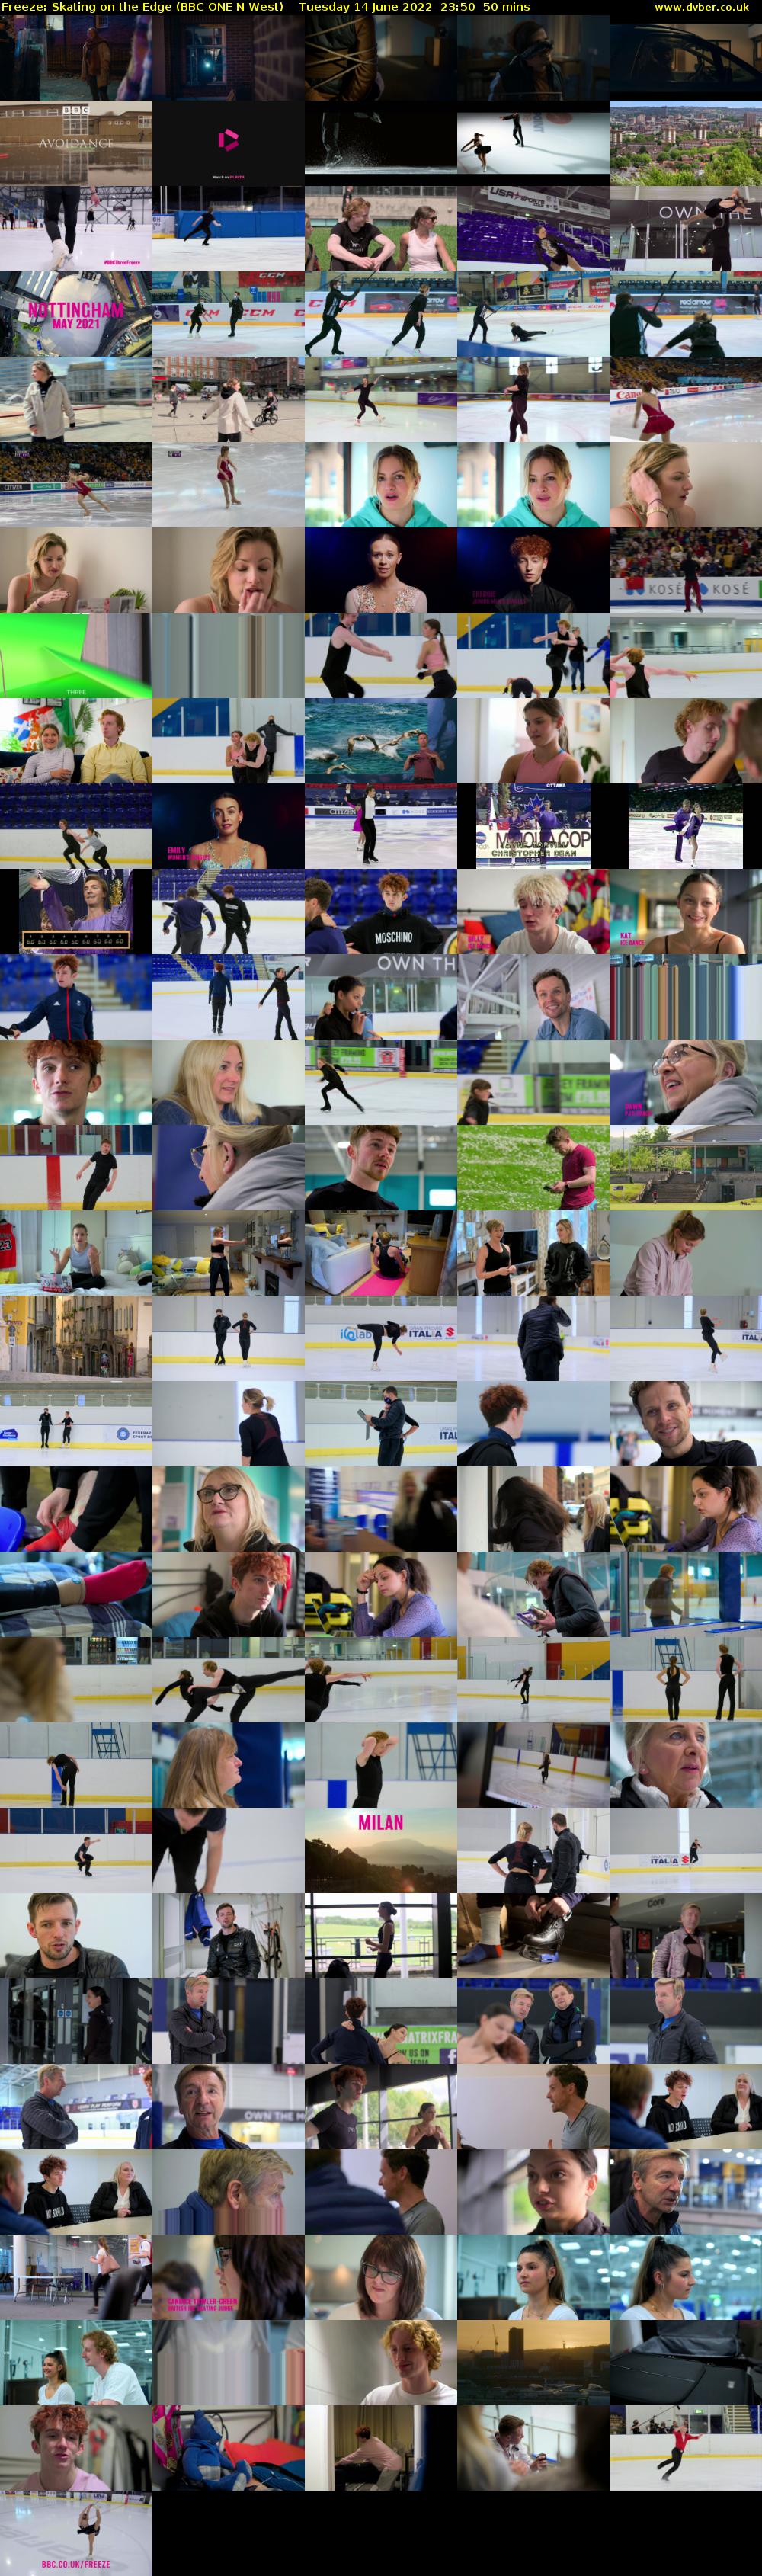 Freeze: Skating on the Edge (BBC ONE N West) Tuesday 14 June 2022 23:50 - 00:40